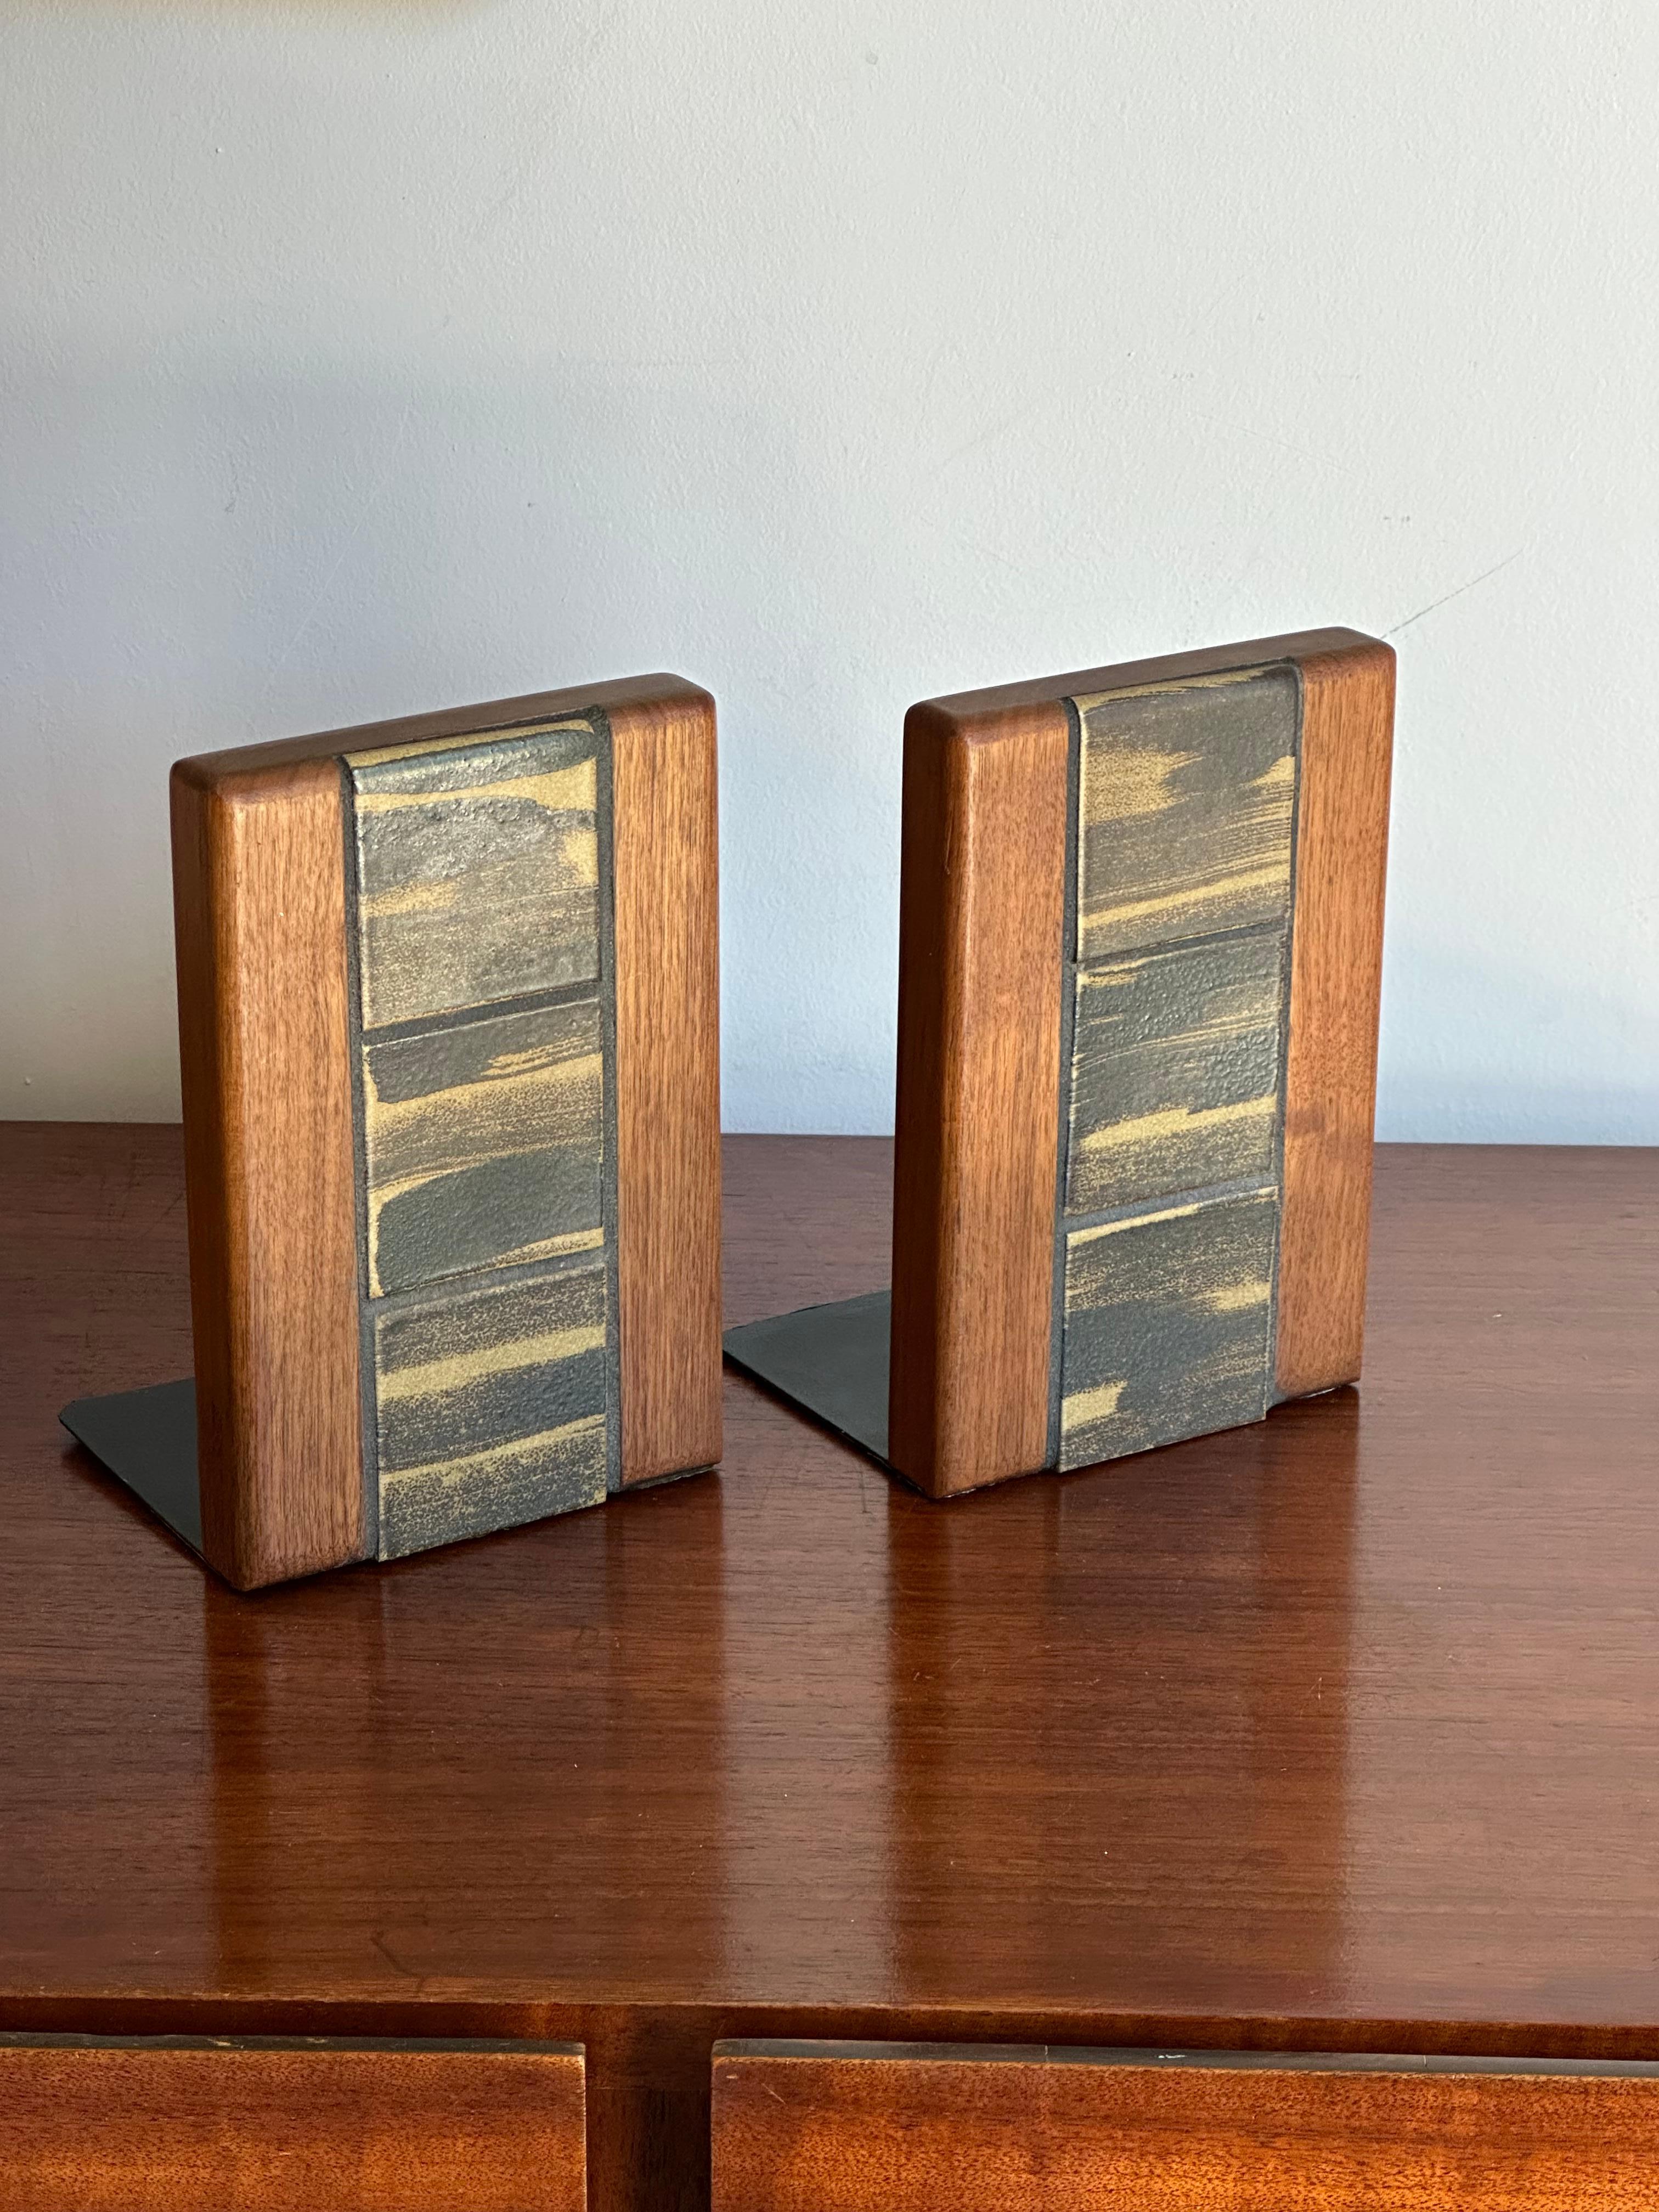 Beautiful walnut and ceramic bookends by Martz/ Marshall Studios circa 1970s. Features well grained walnut along with brown and tan ceramic tiles. Catalog picture attached. Marshall Studios was the infamous company which produced countless lamps by